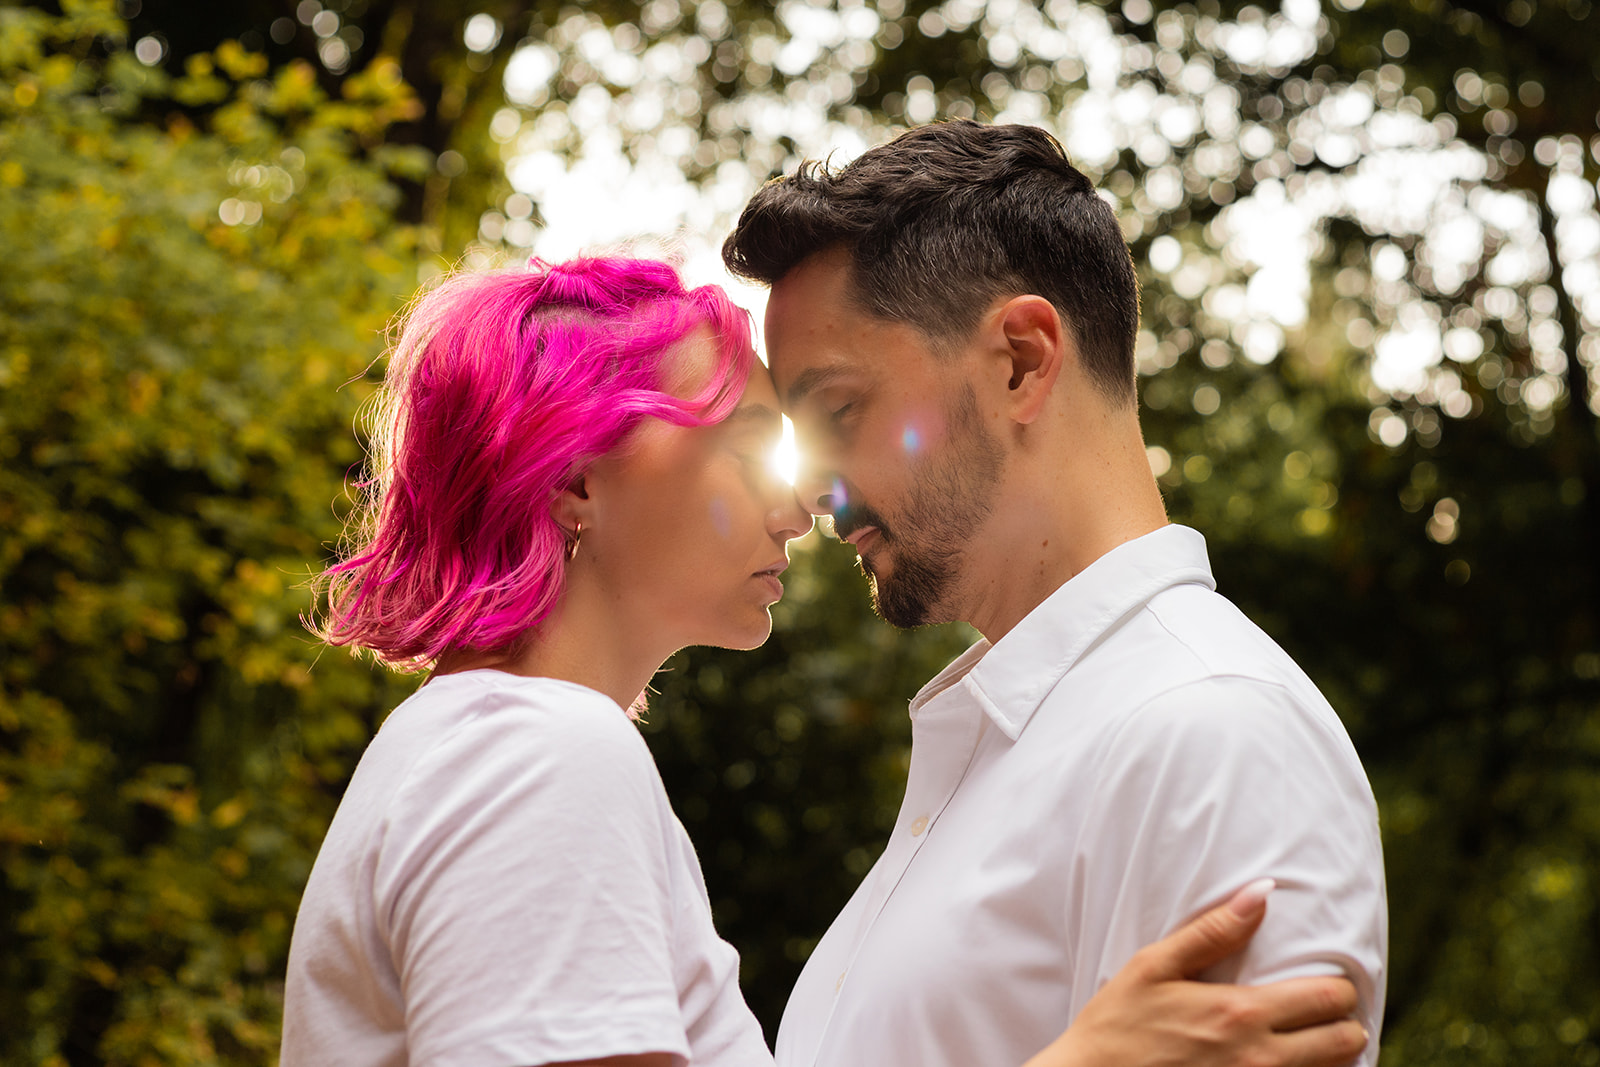 couple touch foreheads tenderly as sunlight streams behind them